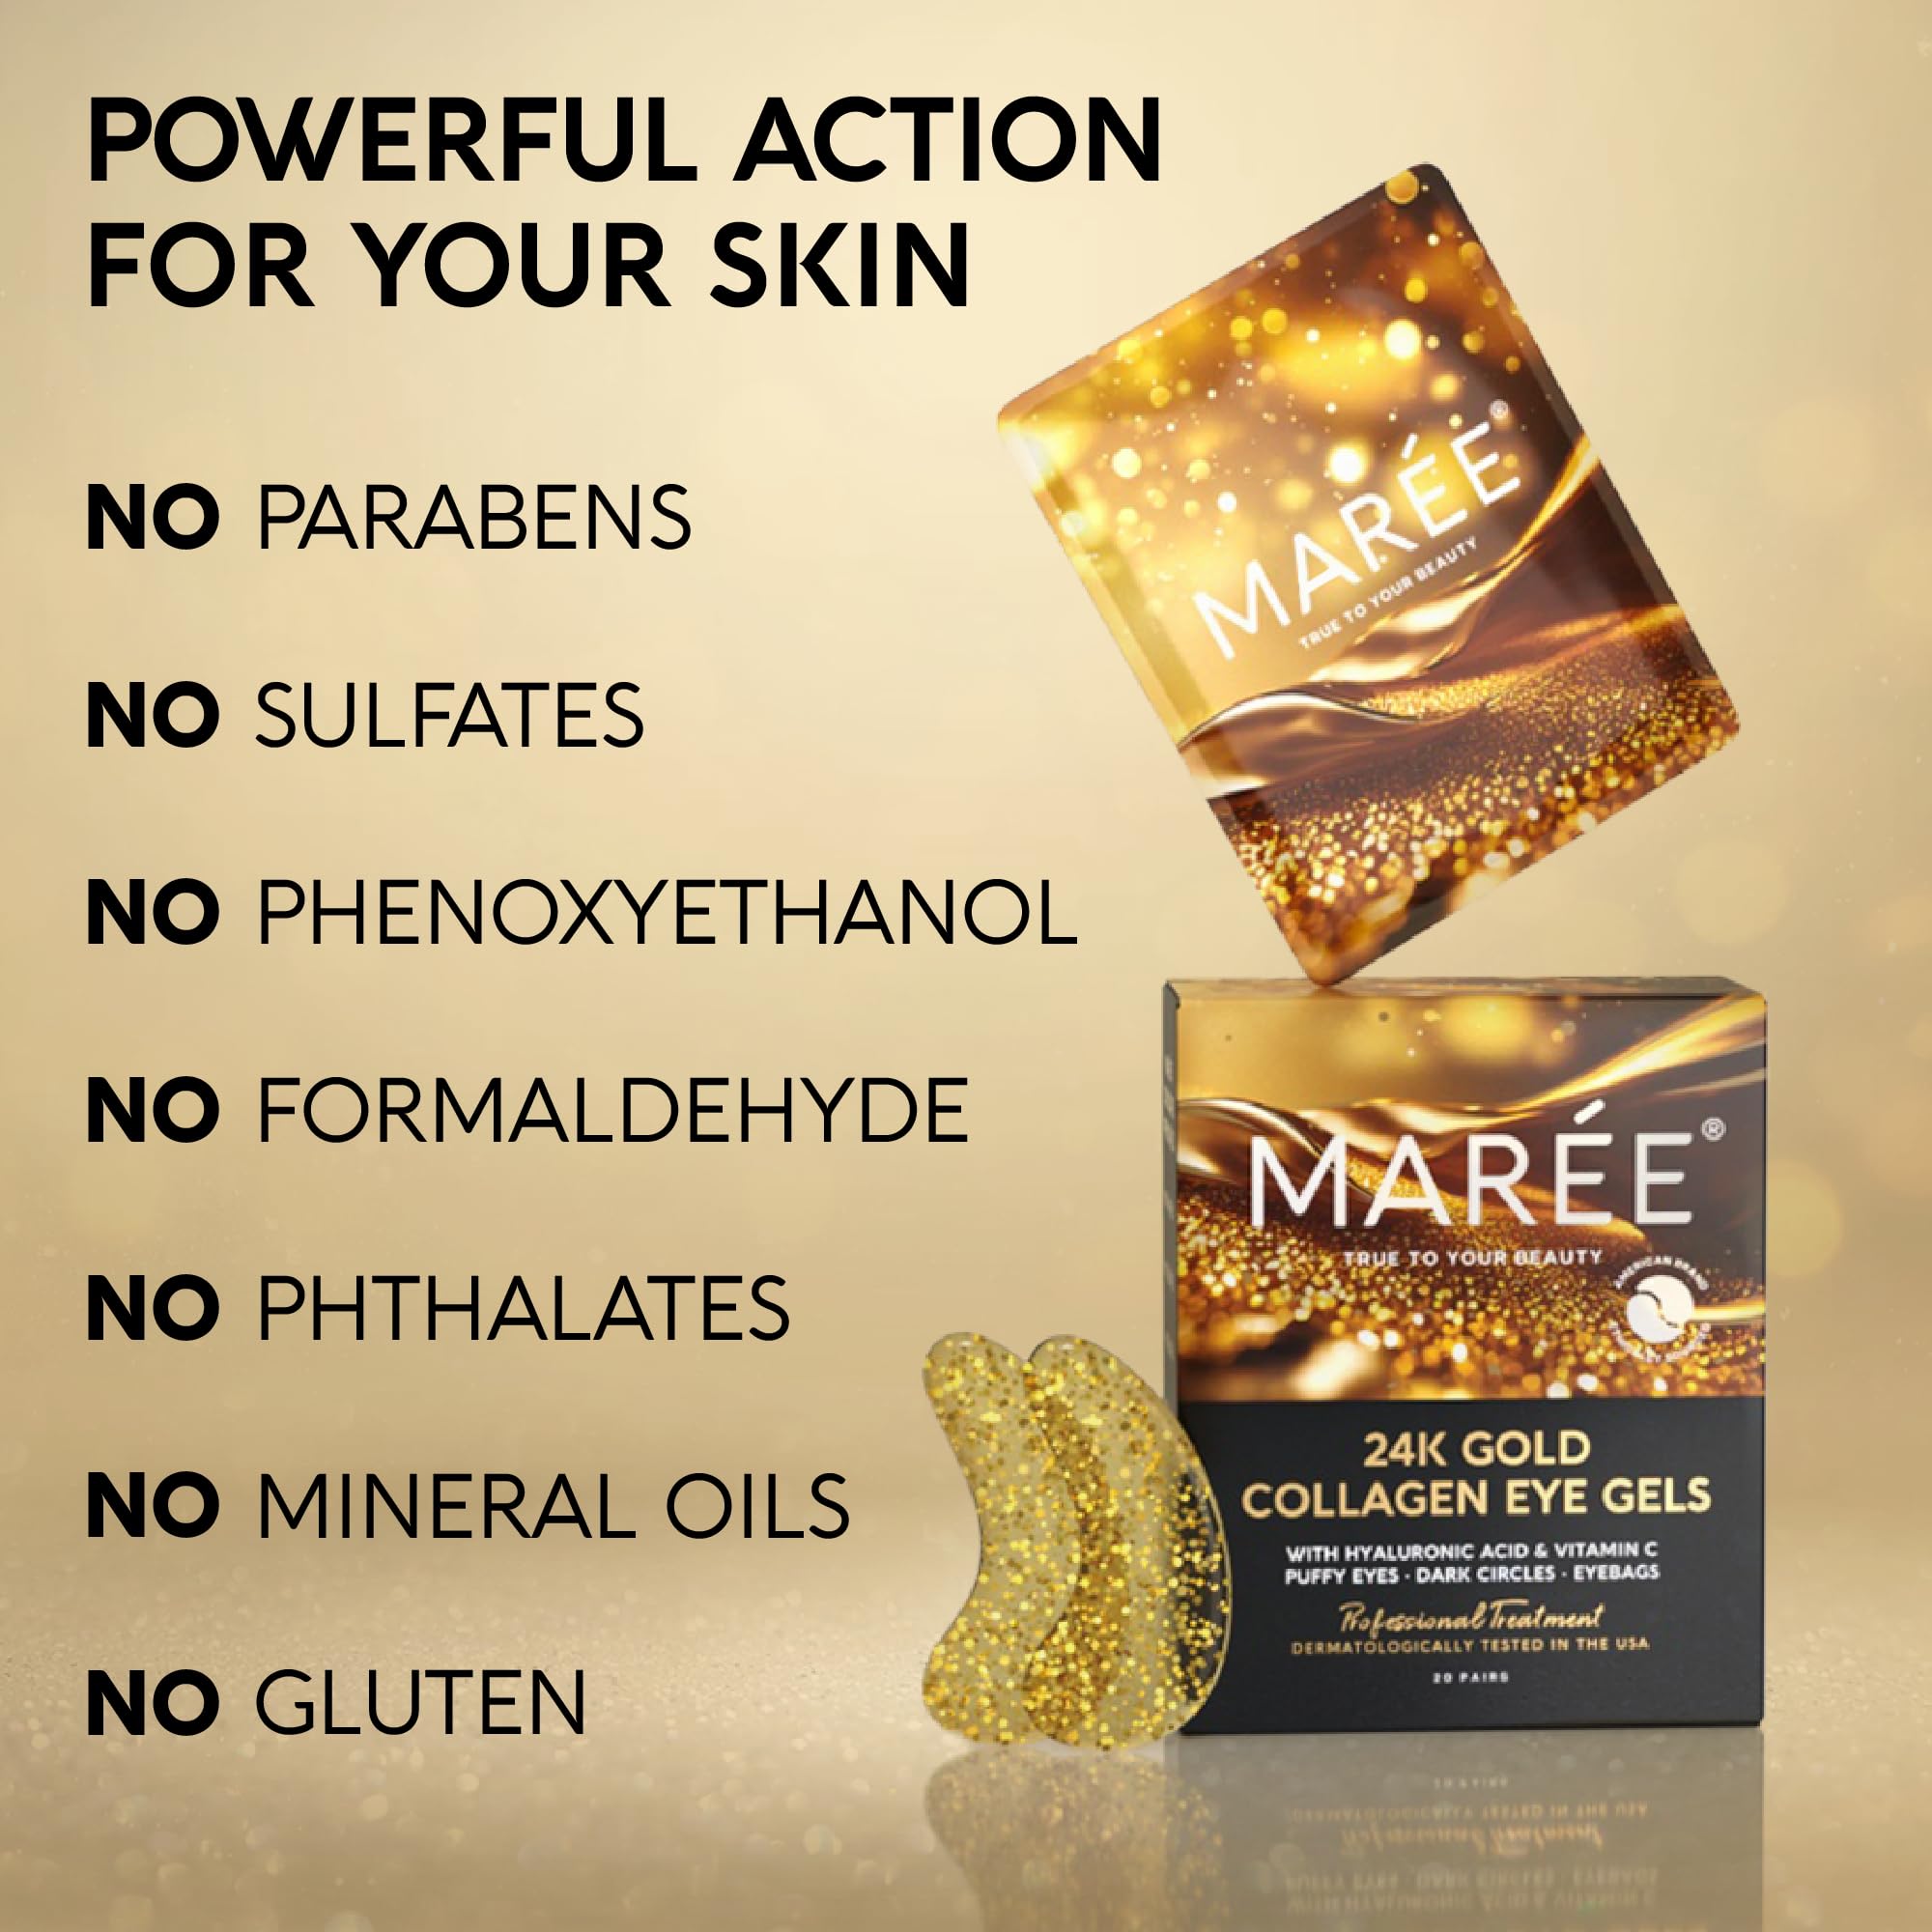 MAREE Under Eye Patches (20 Pairs) - 24K Gold Eye Patches for Puffy Eyes, Dark Circles, Eye Bags - Skin Care with Collagen, Pearl Extract & Hyaluronic Acid - Anti-Aging & Rejuvenating Eye Masks